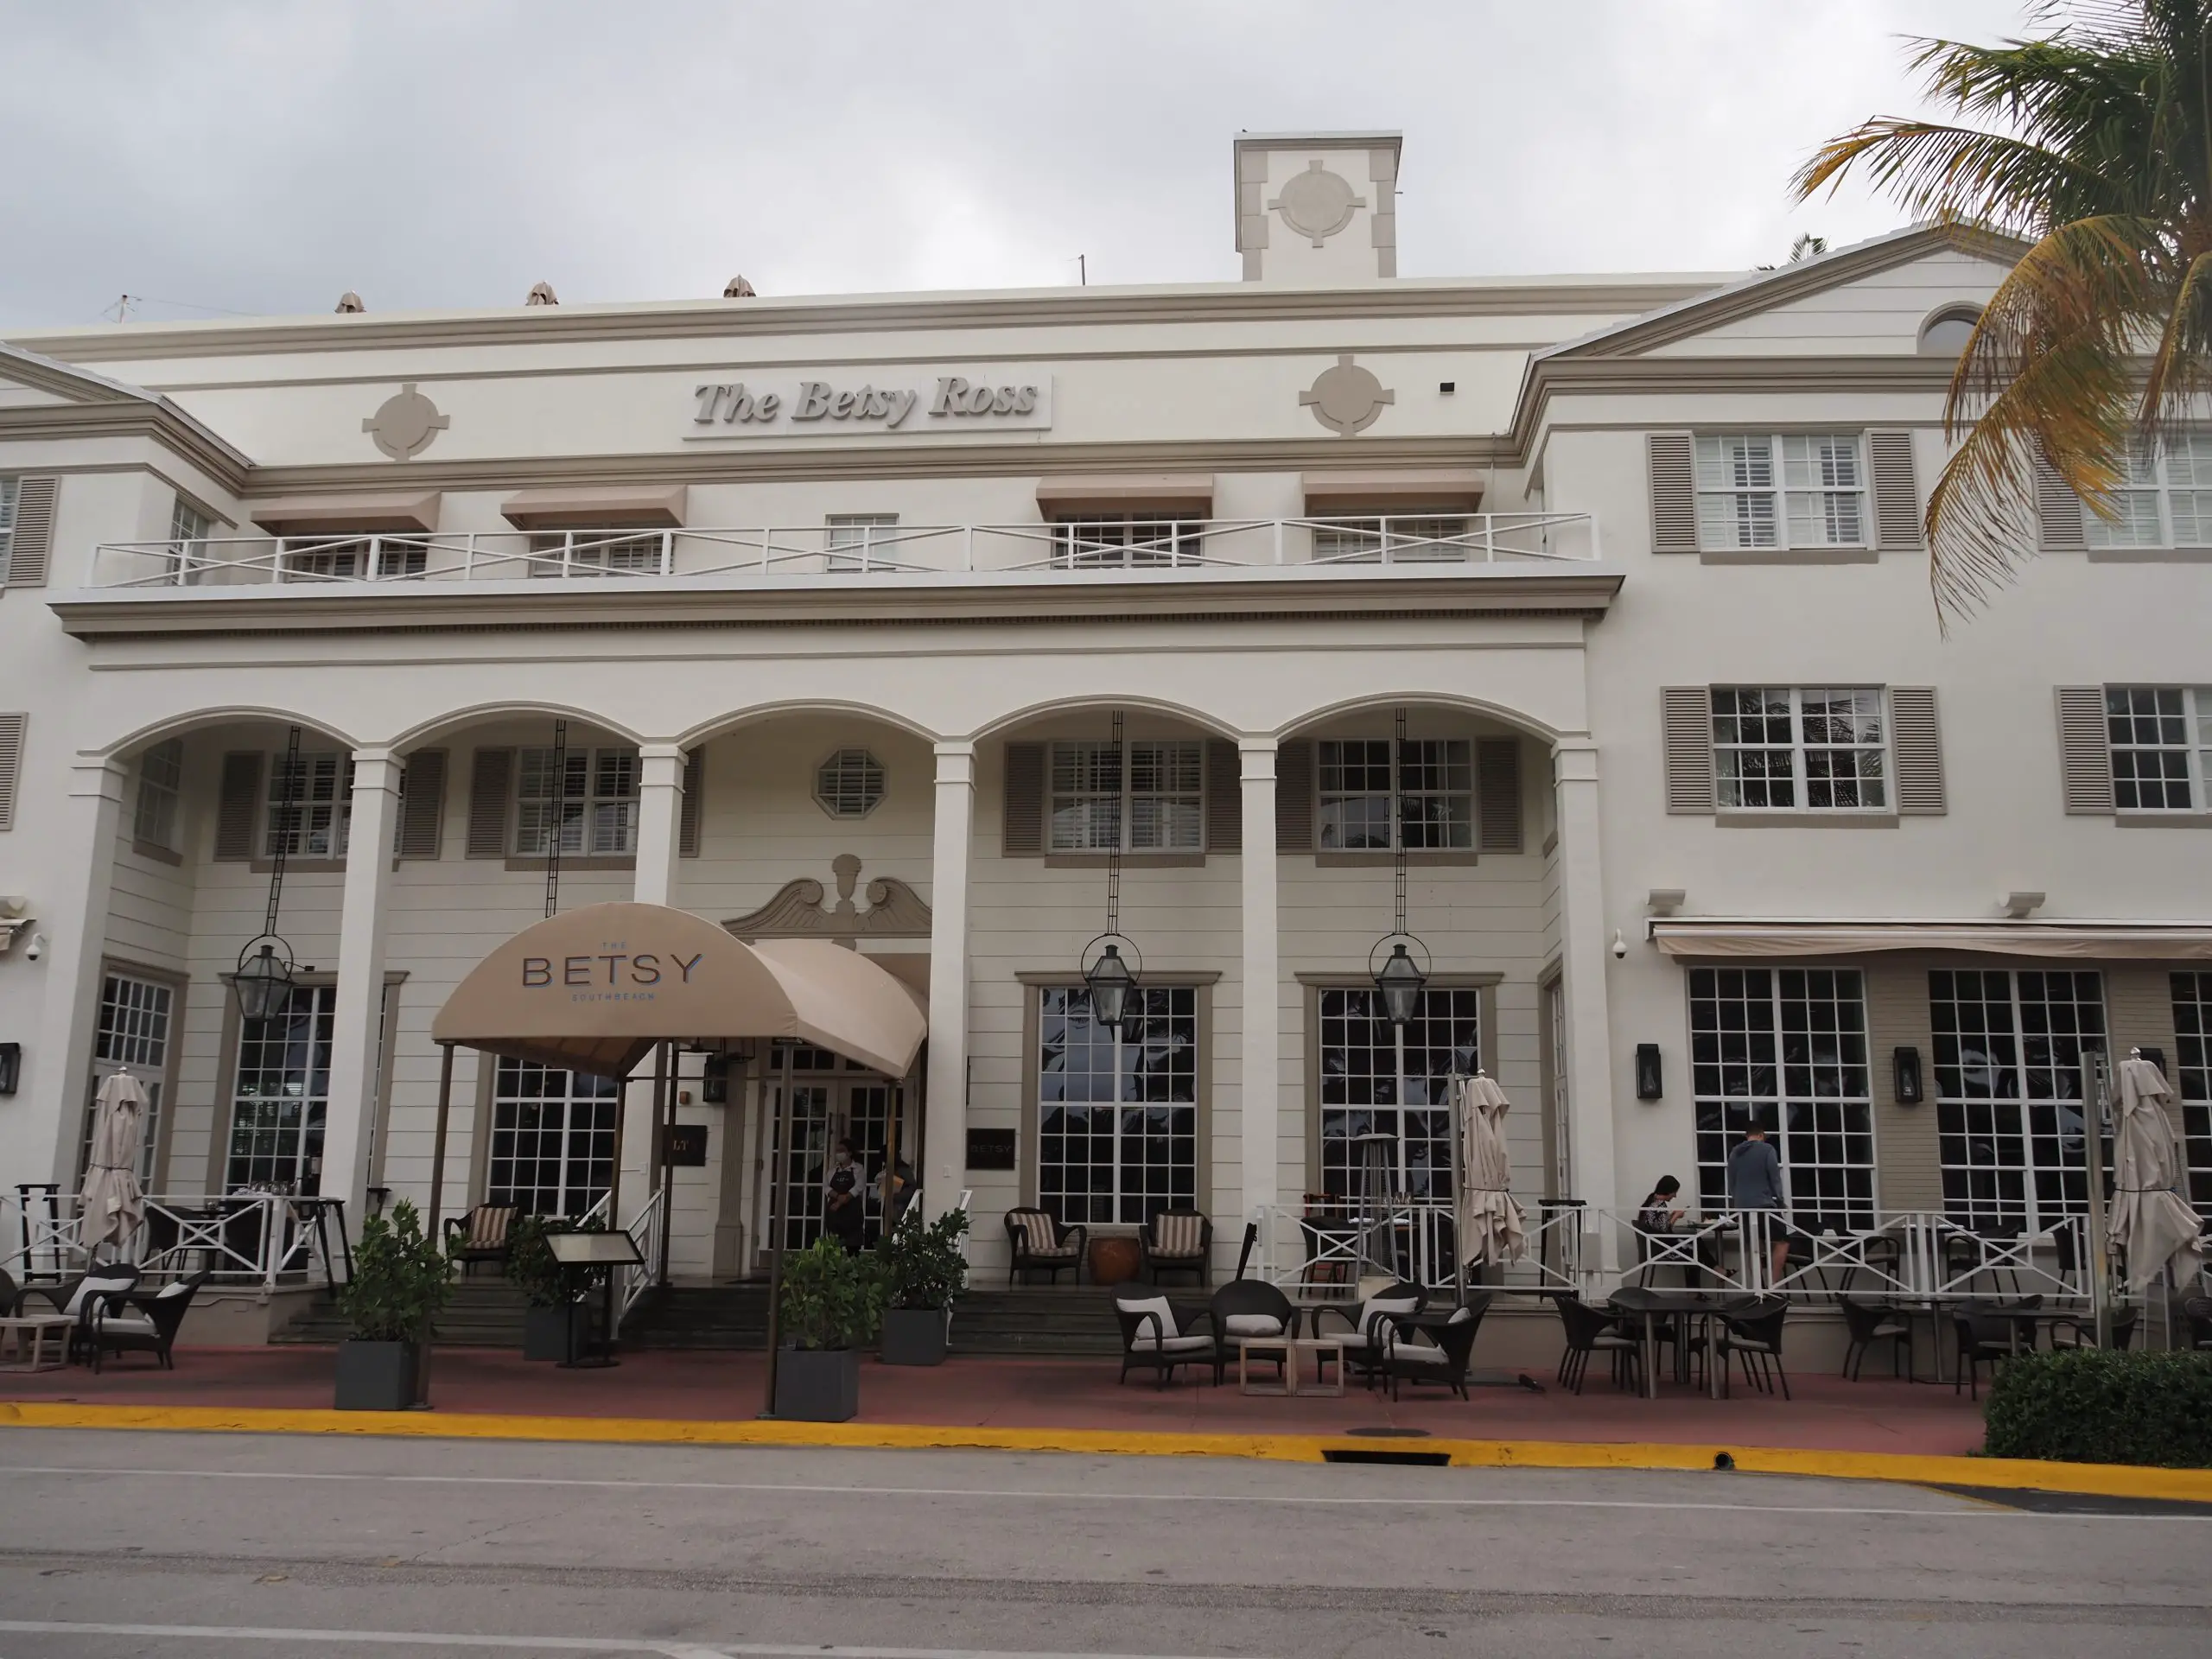 The front of the Betsy Hotel